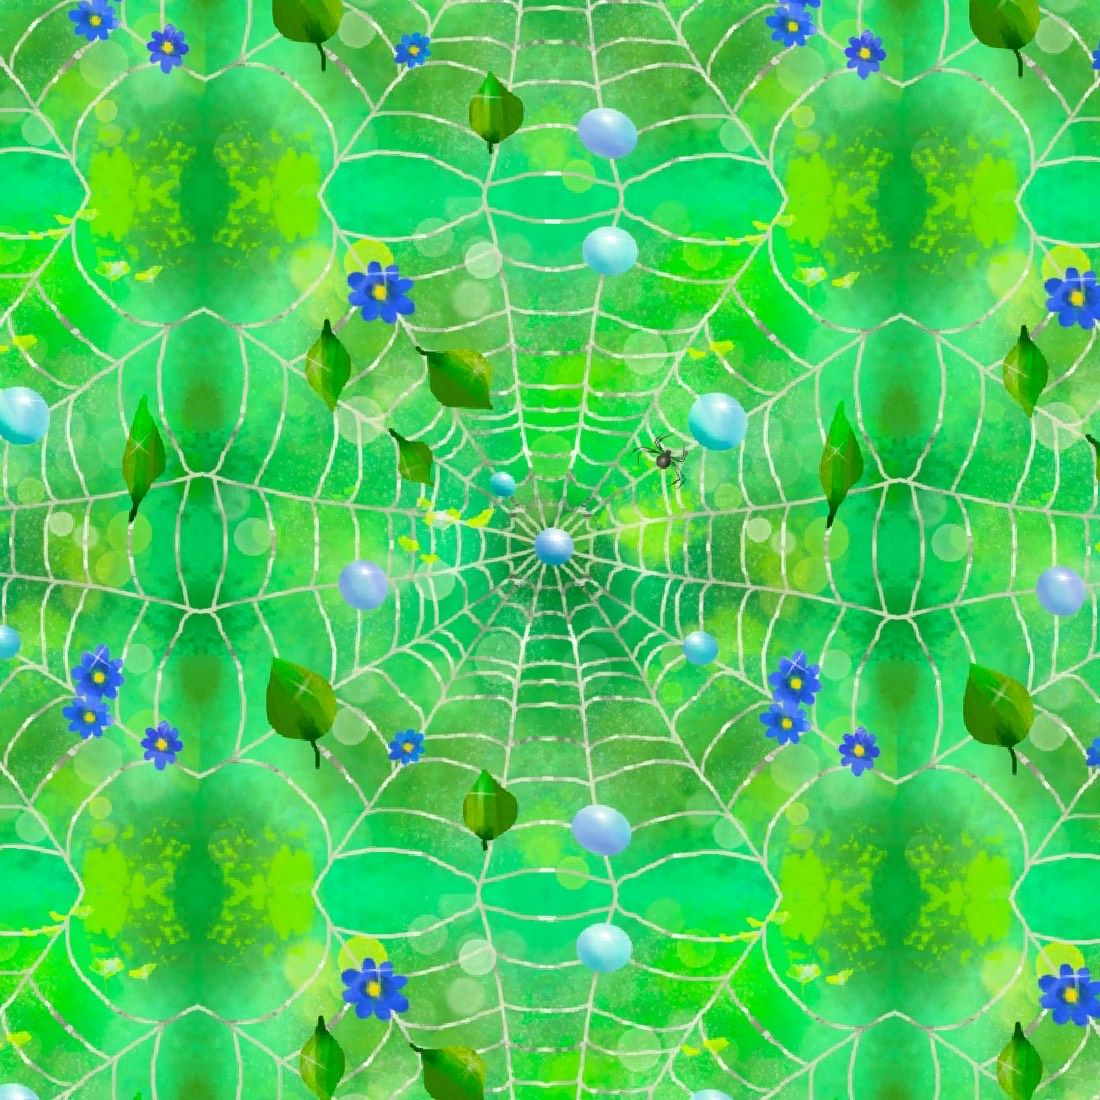 Pattern Web in the forest preview image.